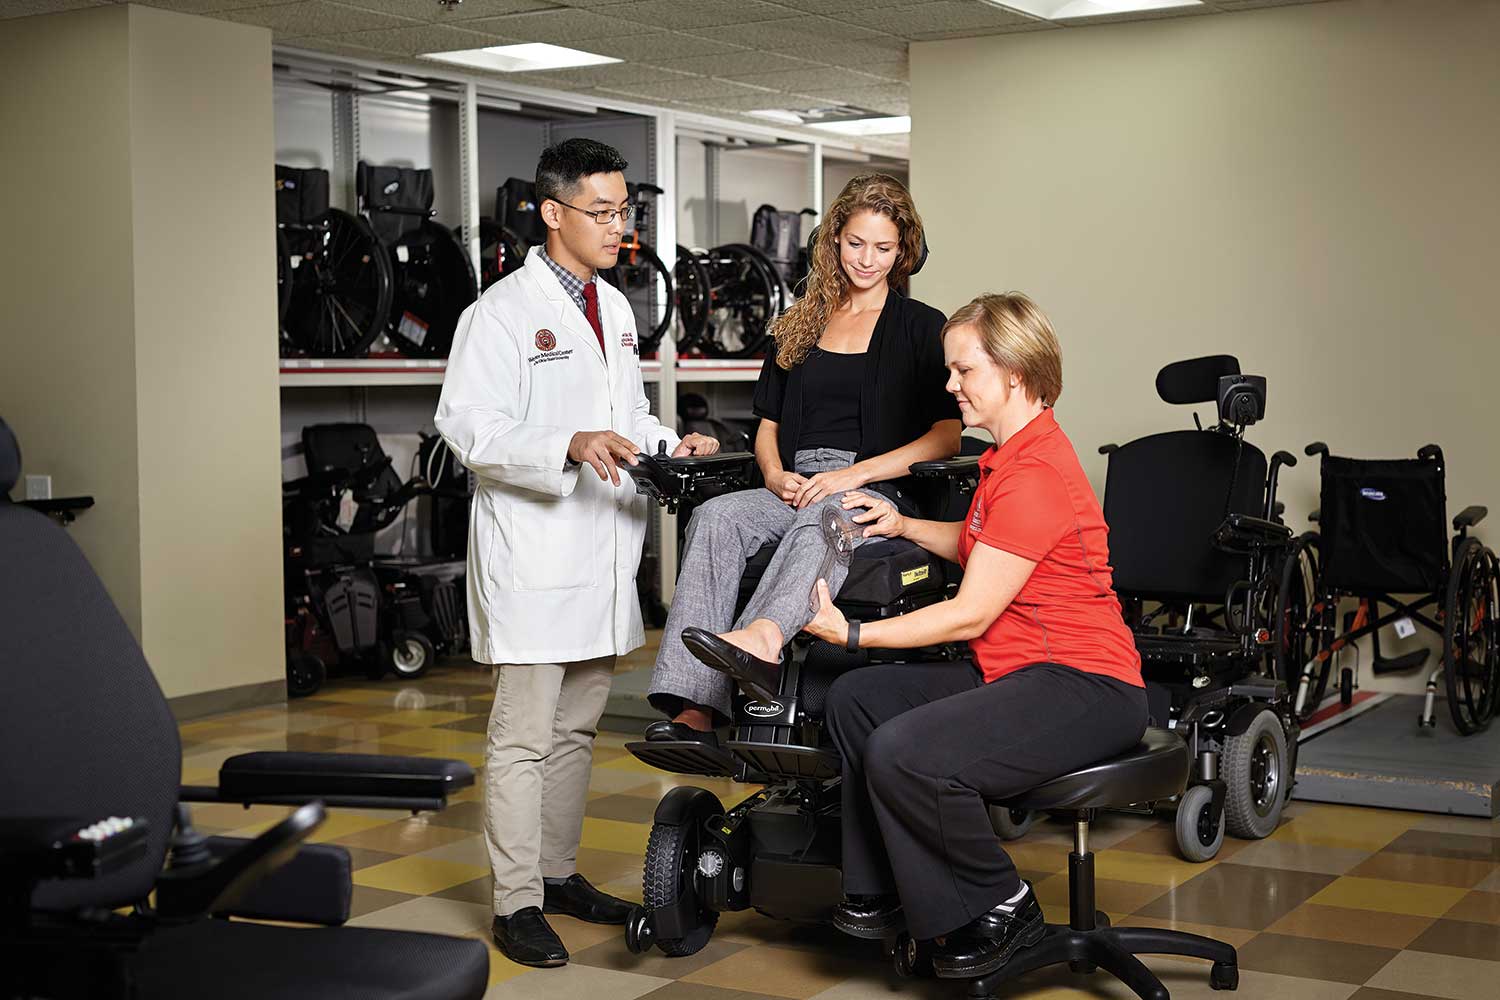 Ohio State University Physical Therapy Home Exercise Program Online